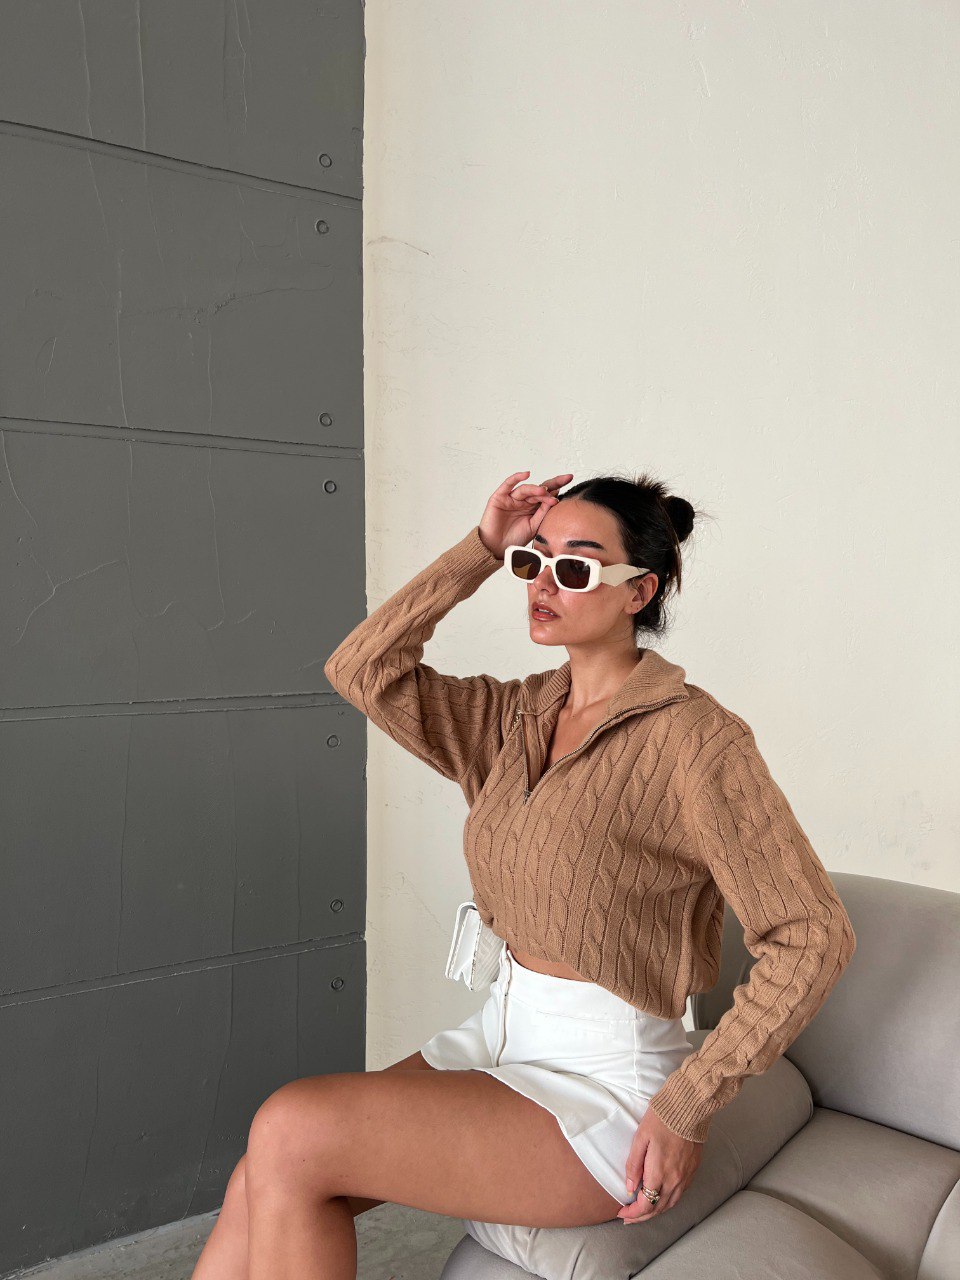 A wholesale clothing model wears sbe10995-sweater-biscuit-color, Turkish wholesale Sweater of Sobe